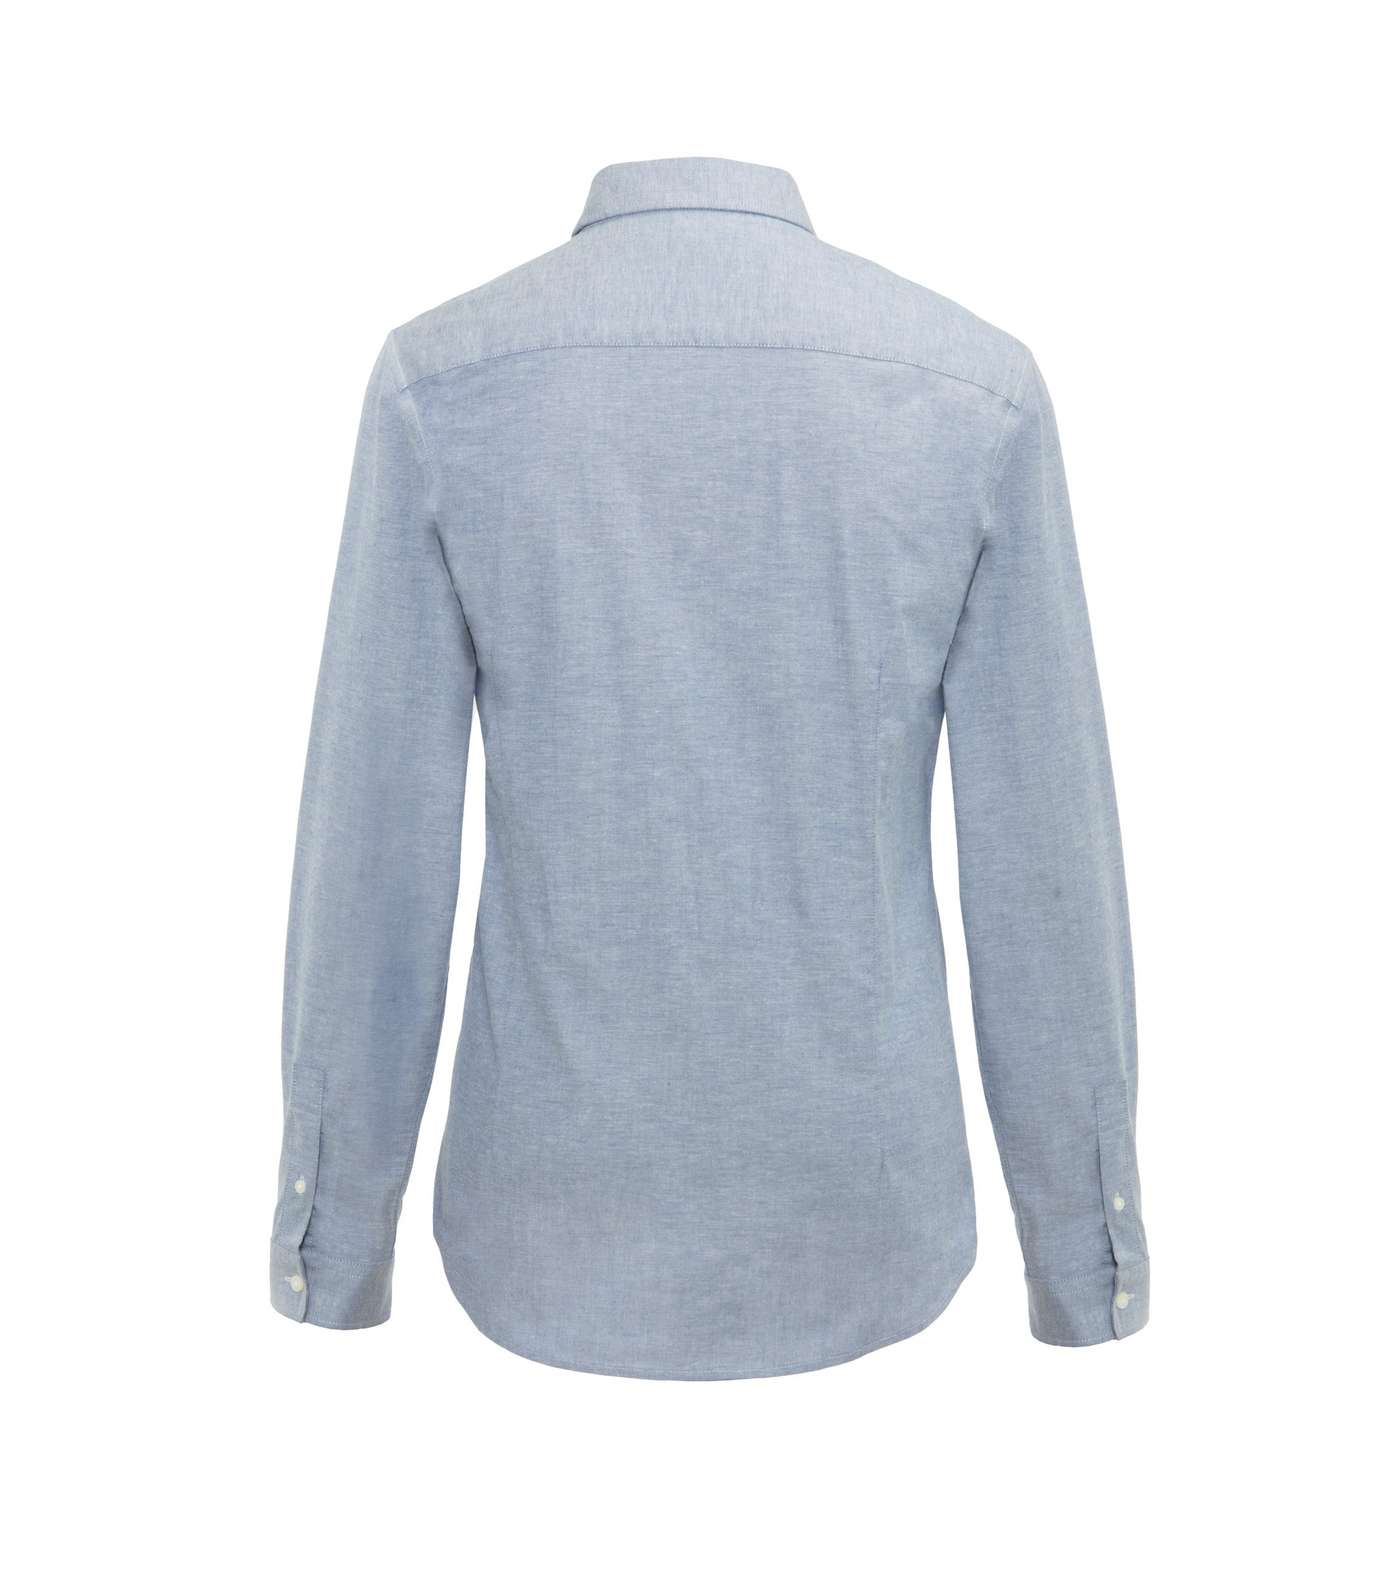 Pale Blue Muscle Fit Oxford Shirt  Image 2